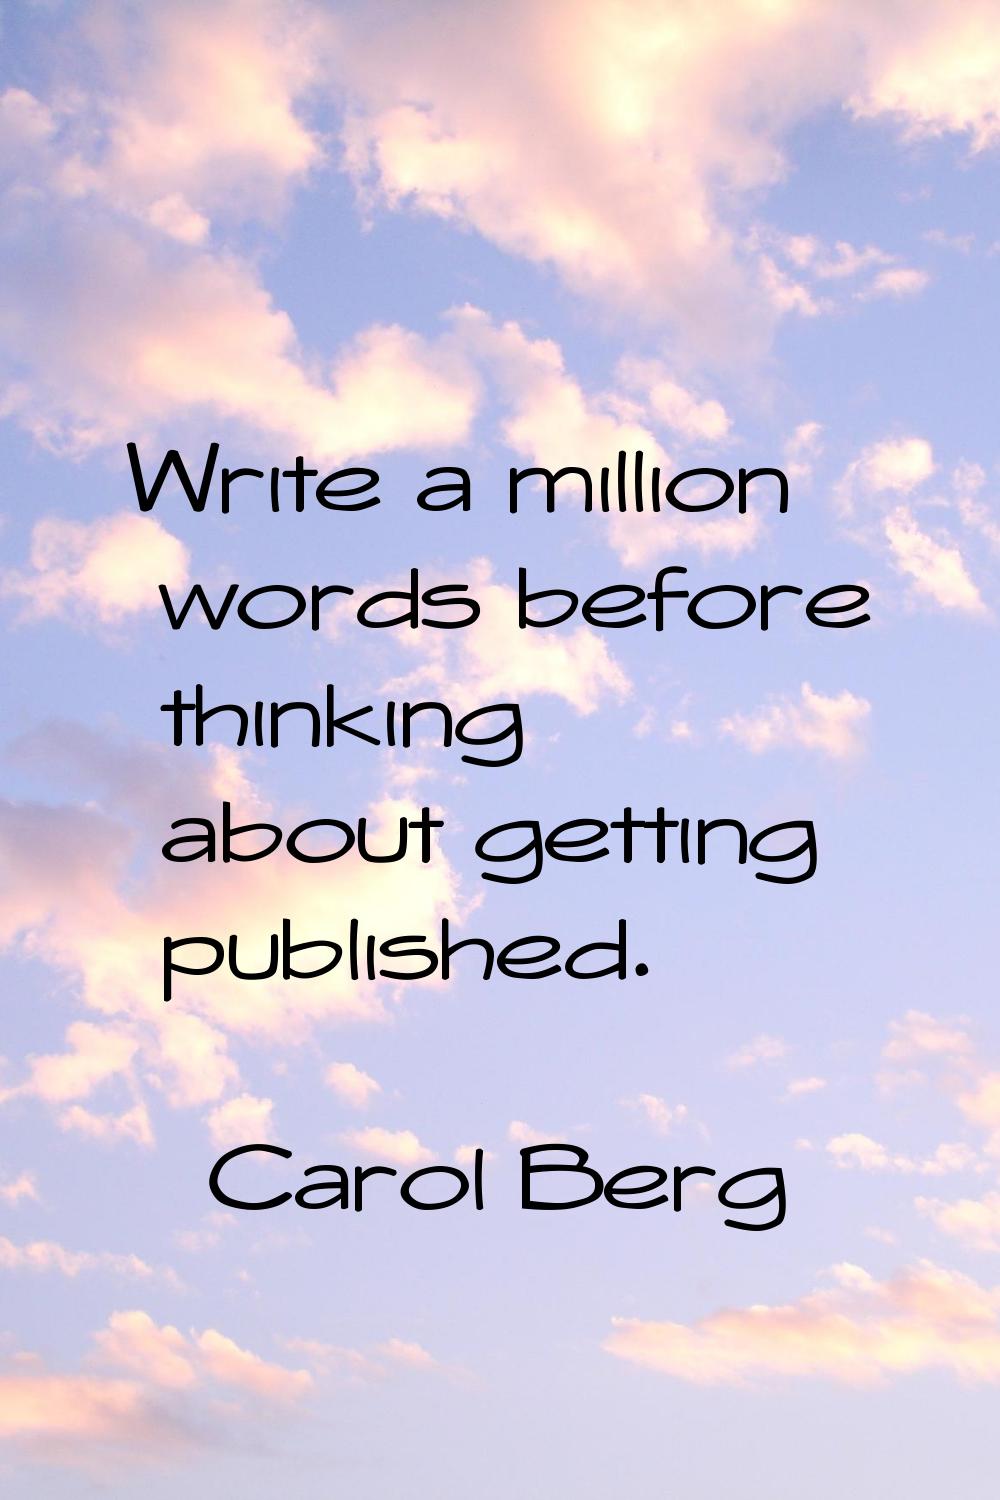 Write a million words before thinking about getting published.